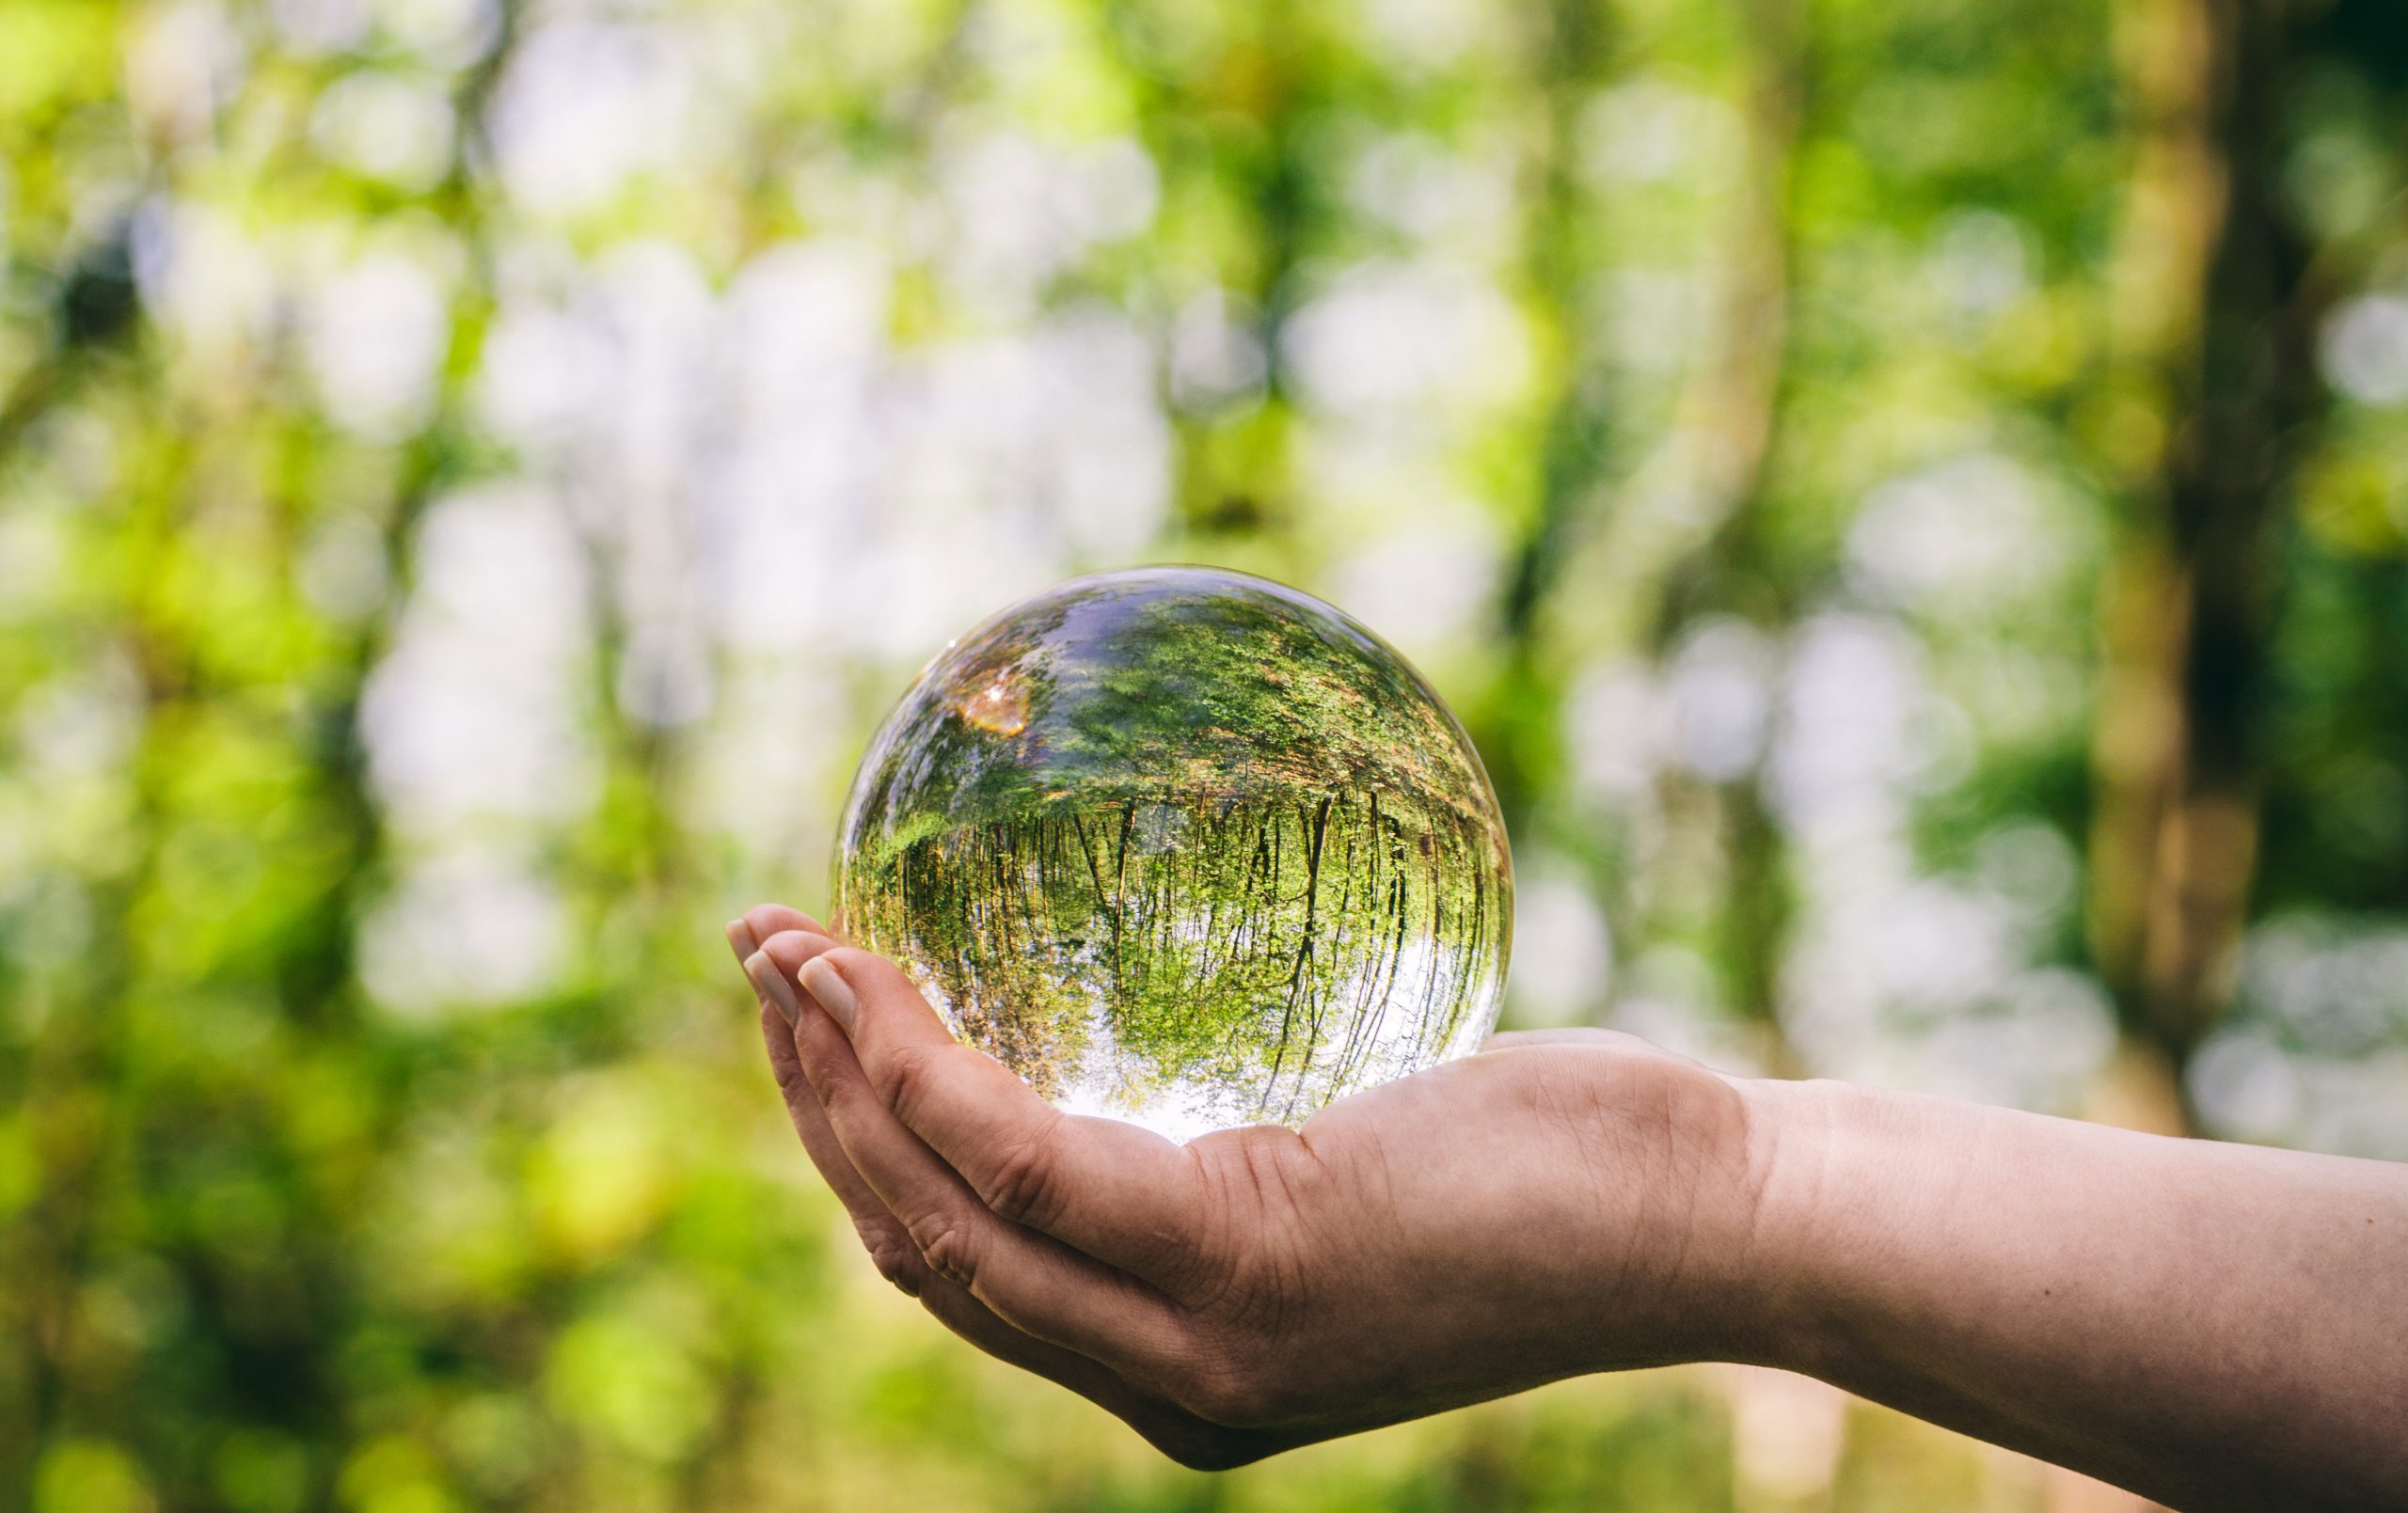 environment image - glass sphere in nature